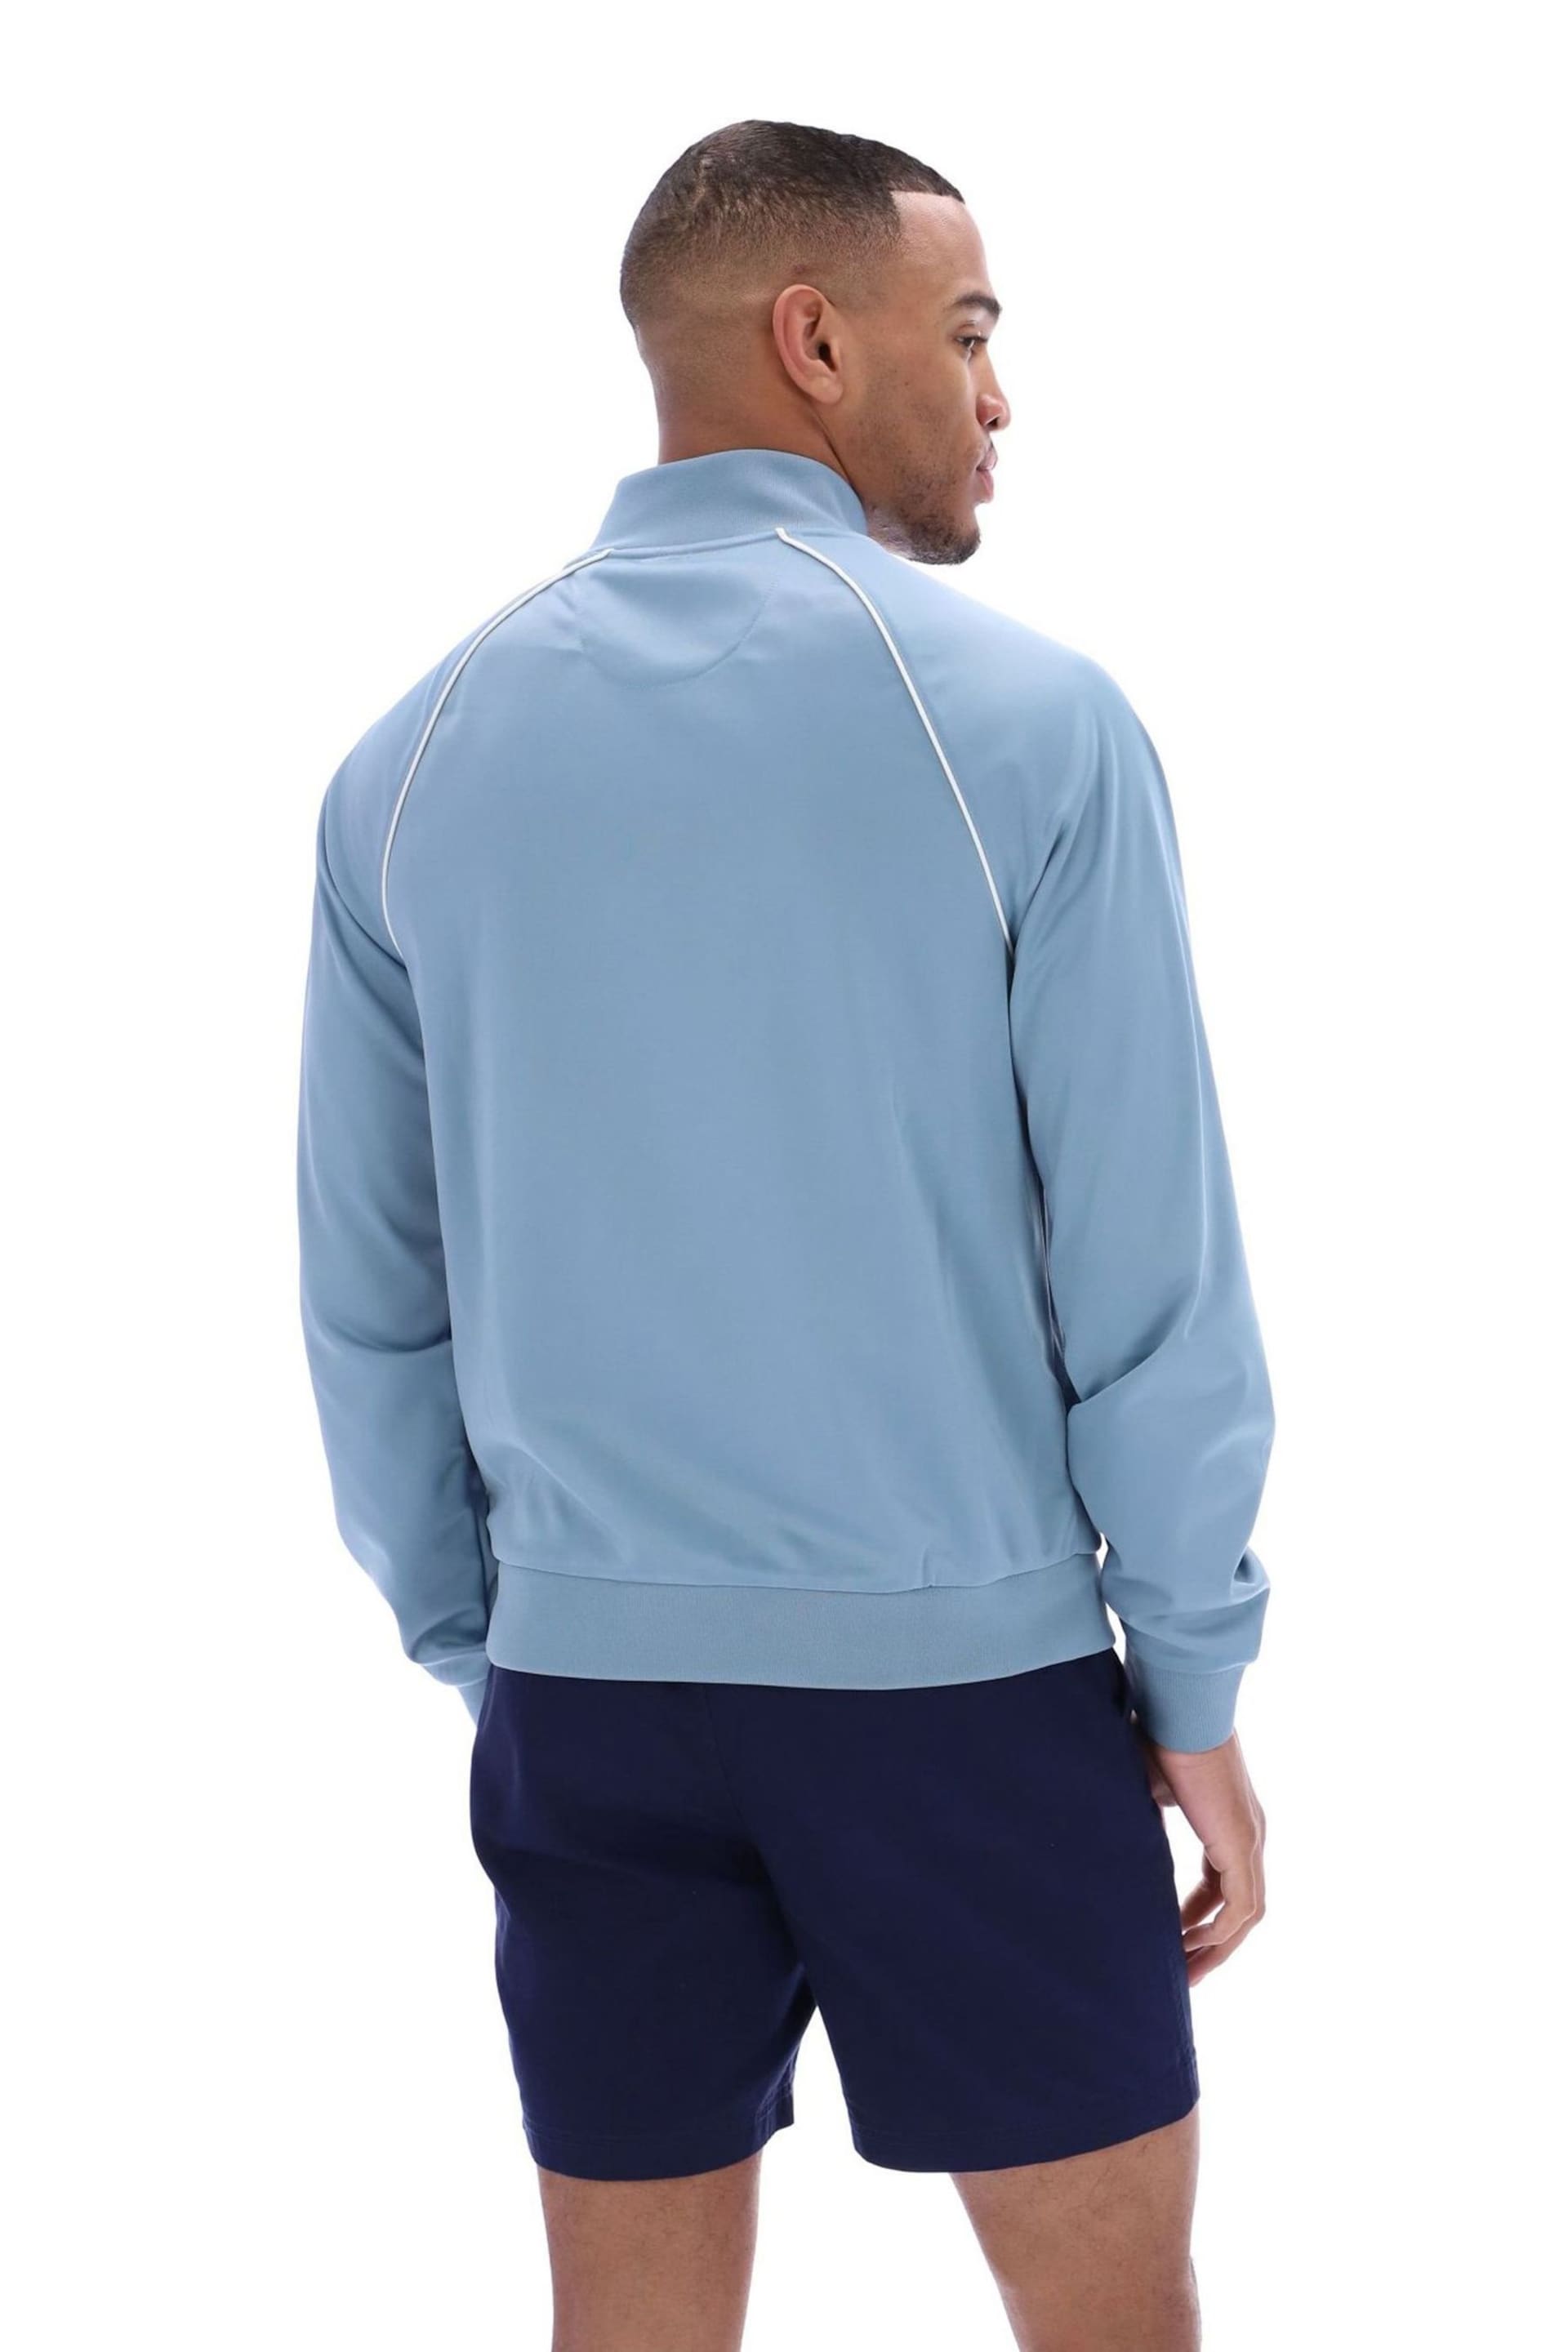 Fila Blue Tristan Track Top With Piping Detail - Image 4 of 4